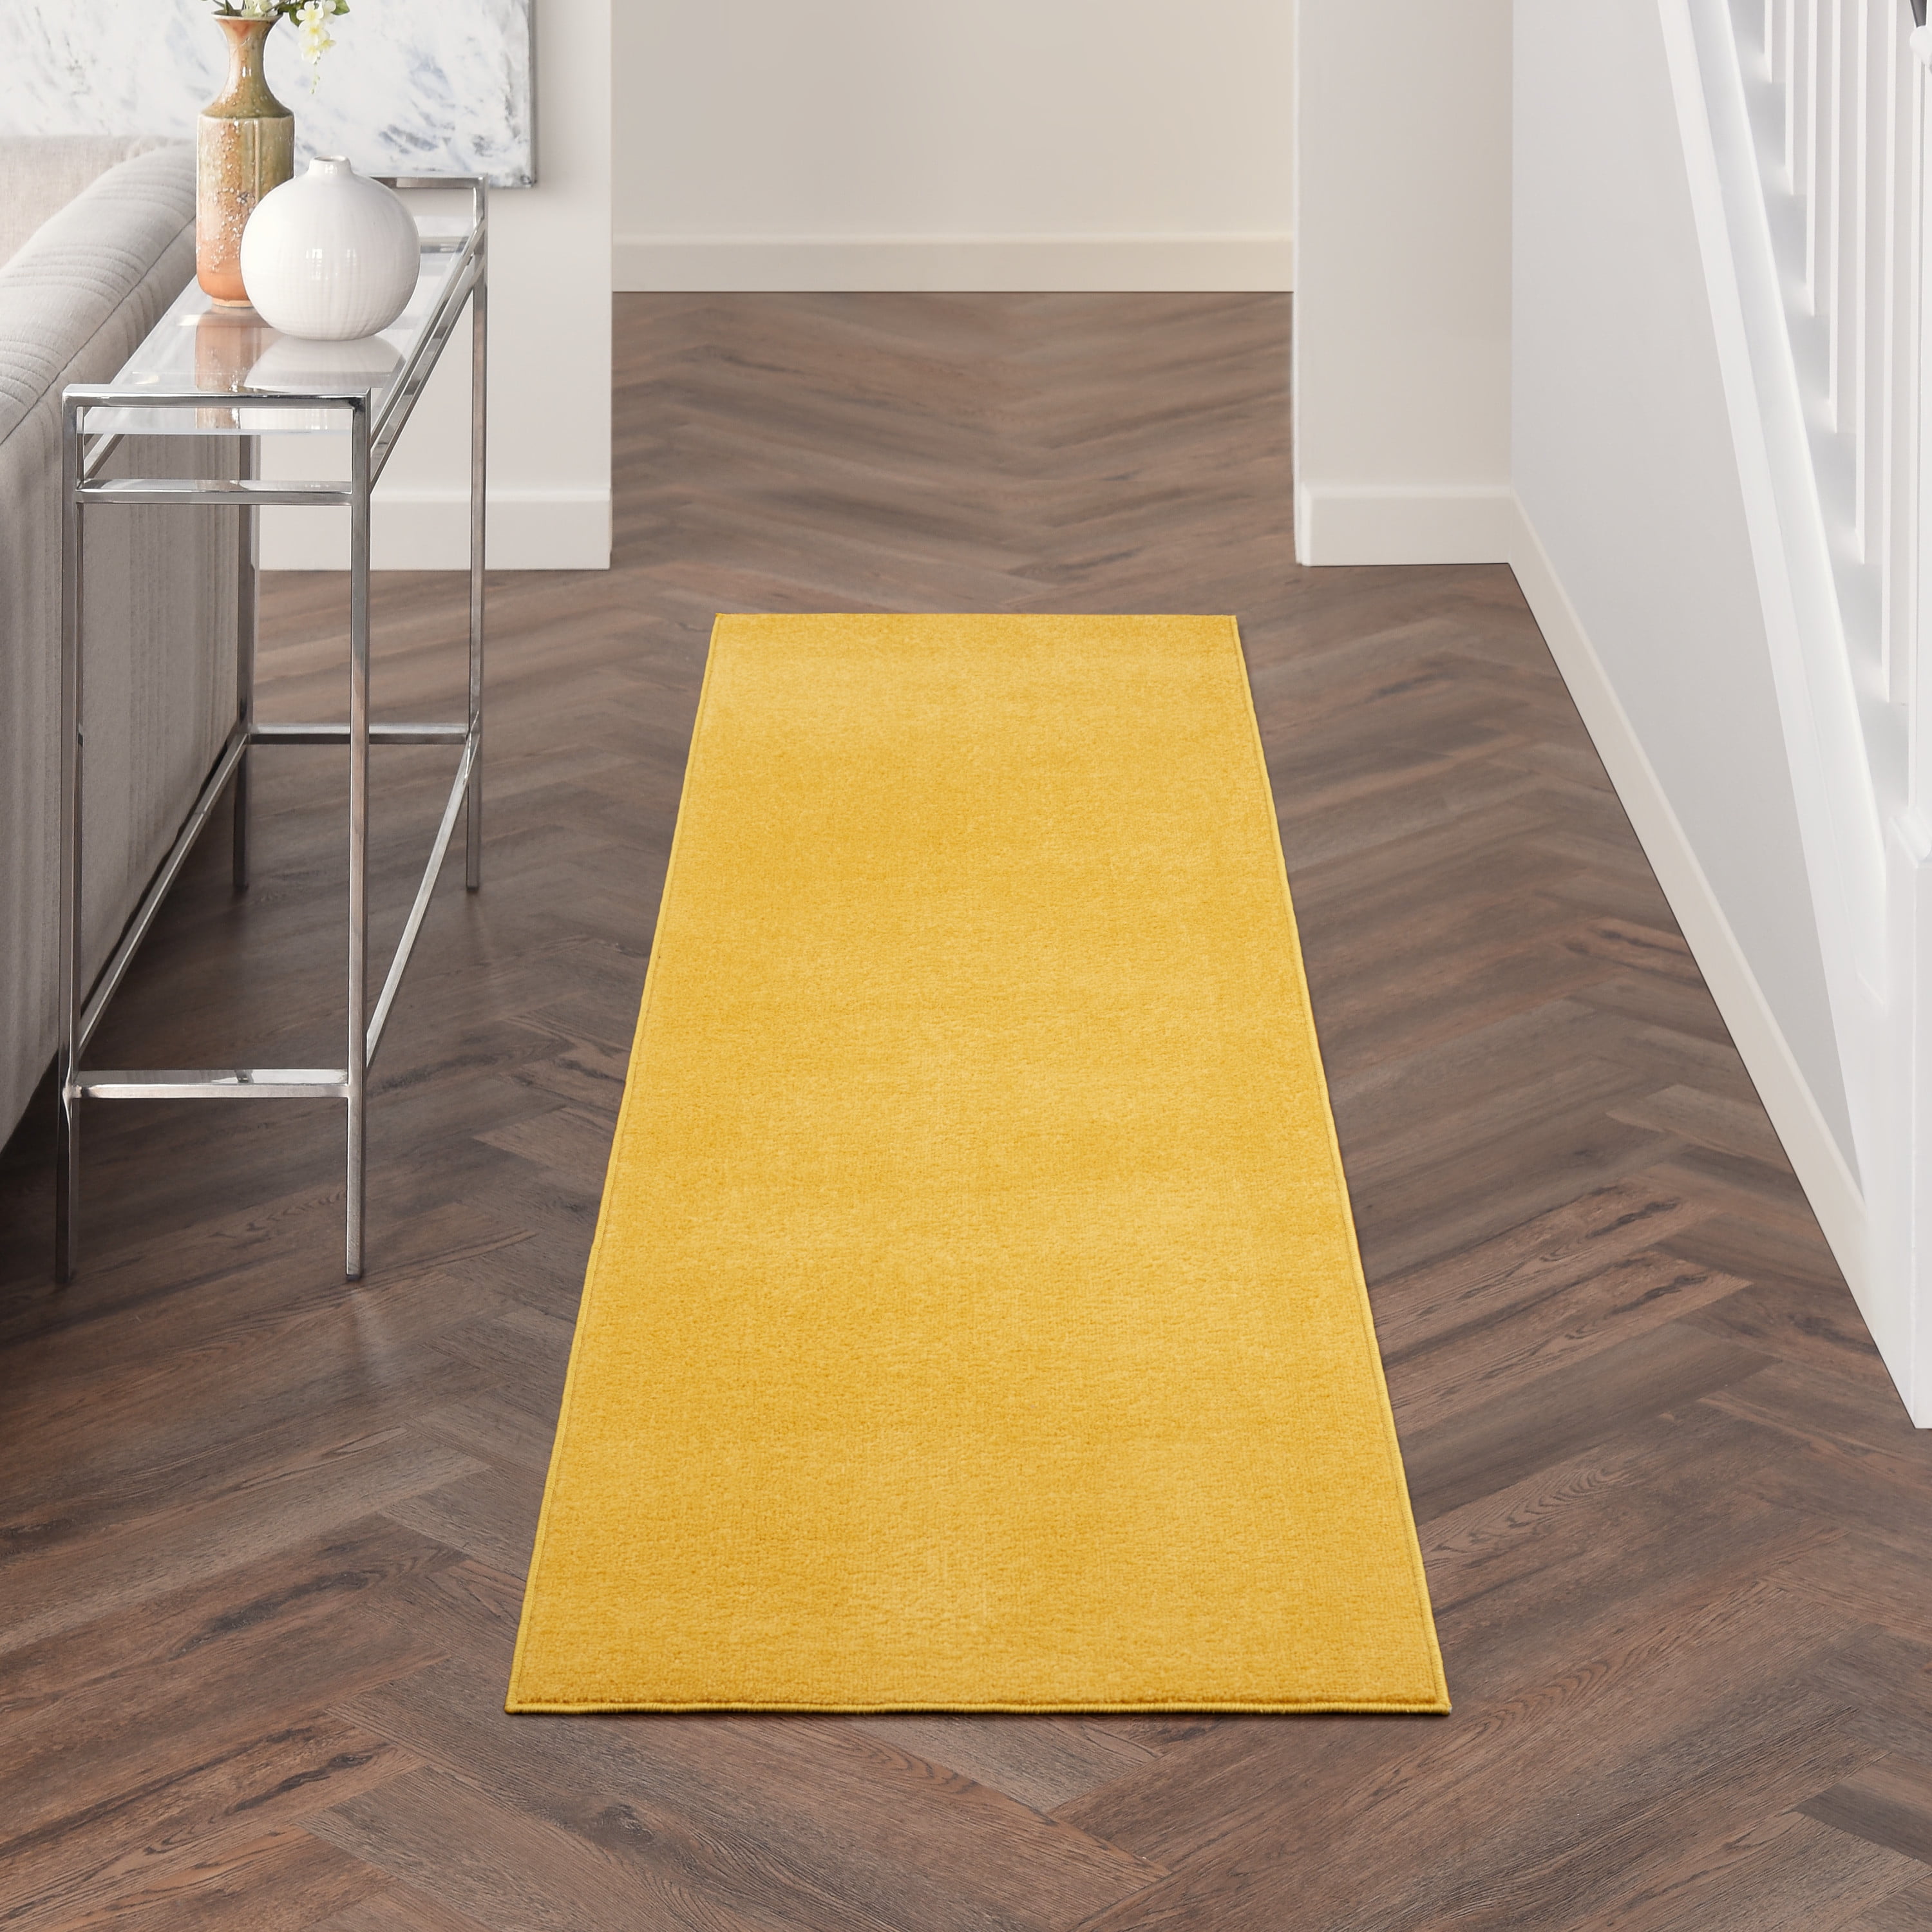 New Modern Mustard Ochre Good Quality Small Large Floor Carpets Rugs Runners 